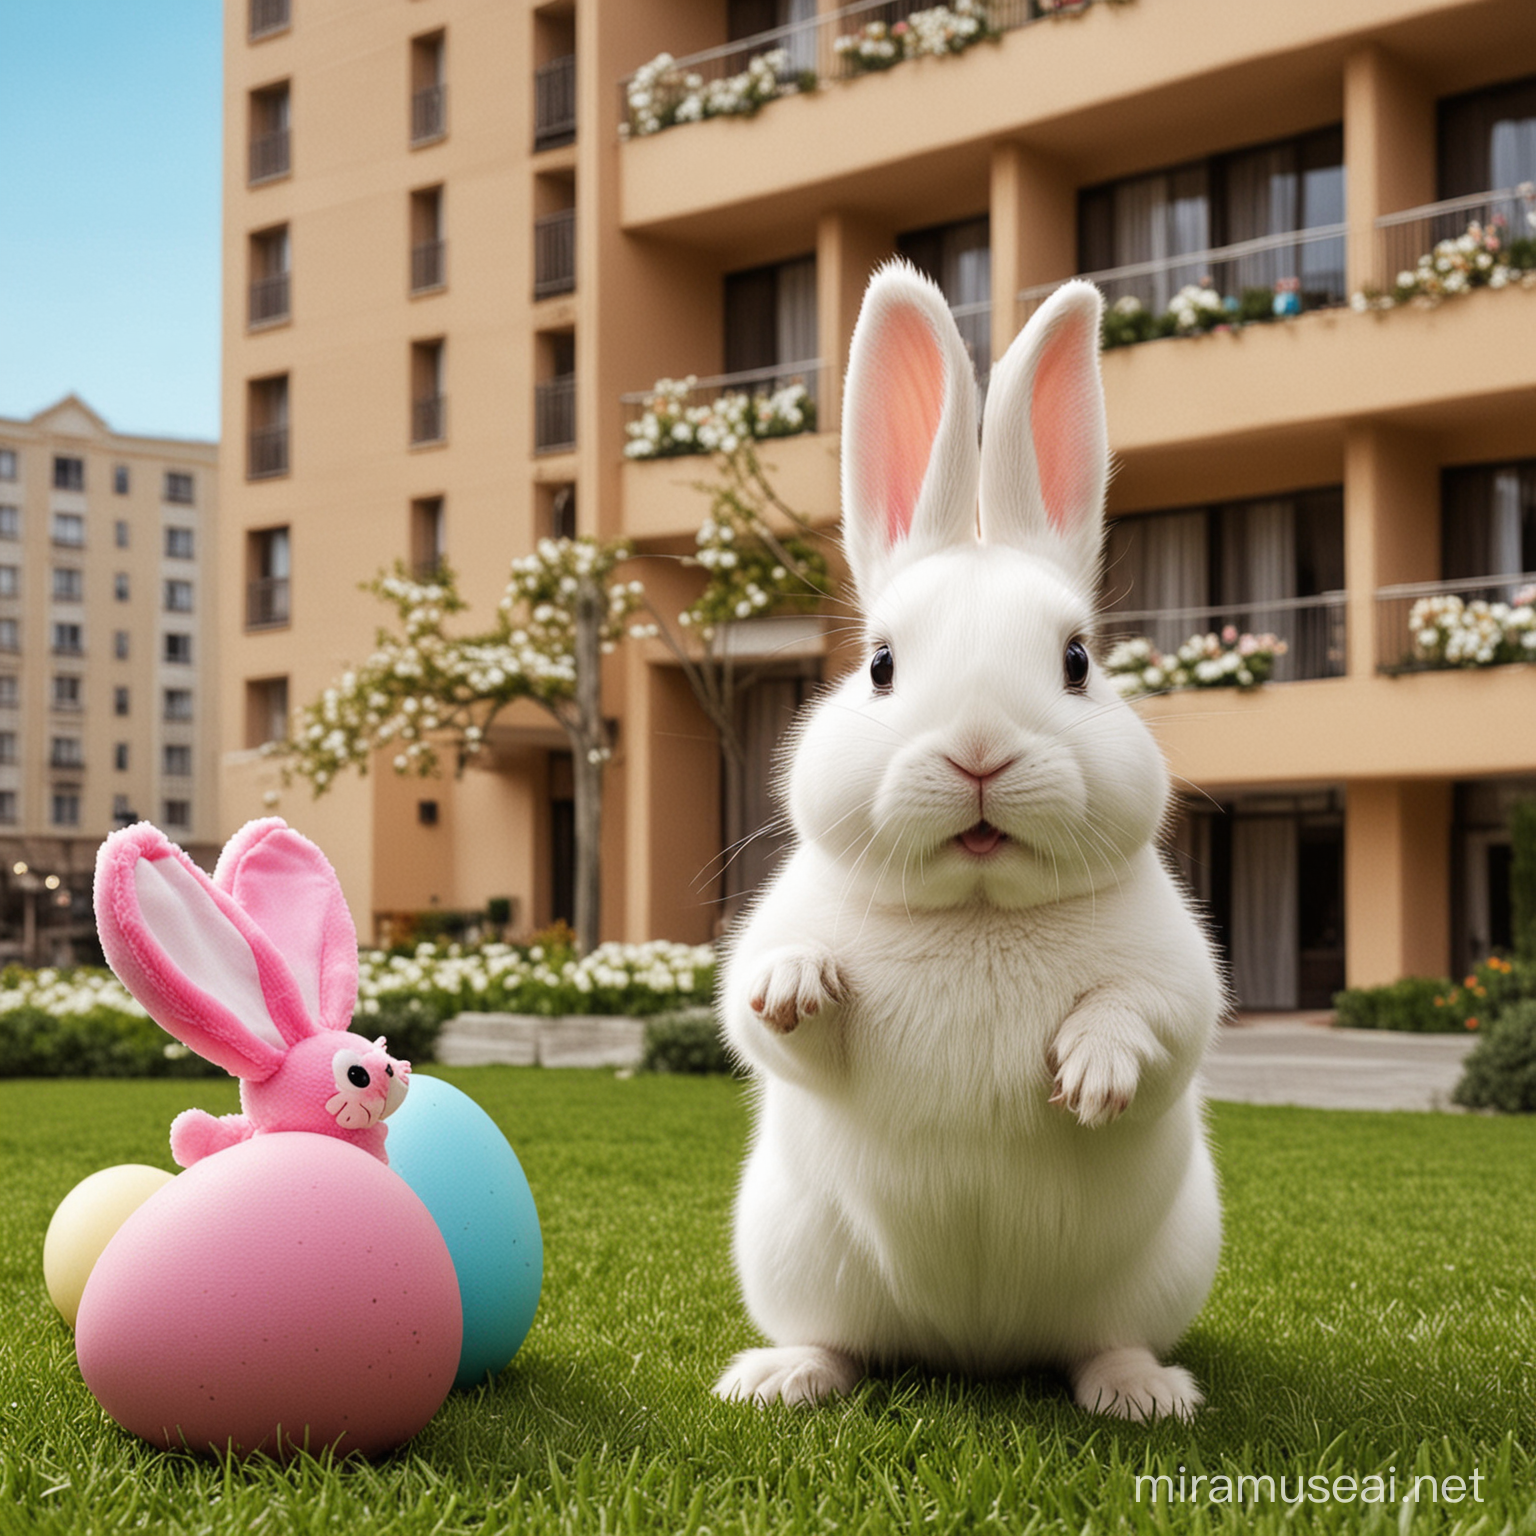 Make me a picture for Easter with rаbbit and hotel outside
